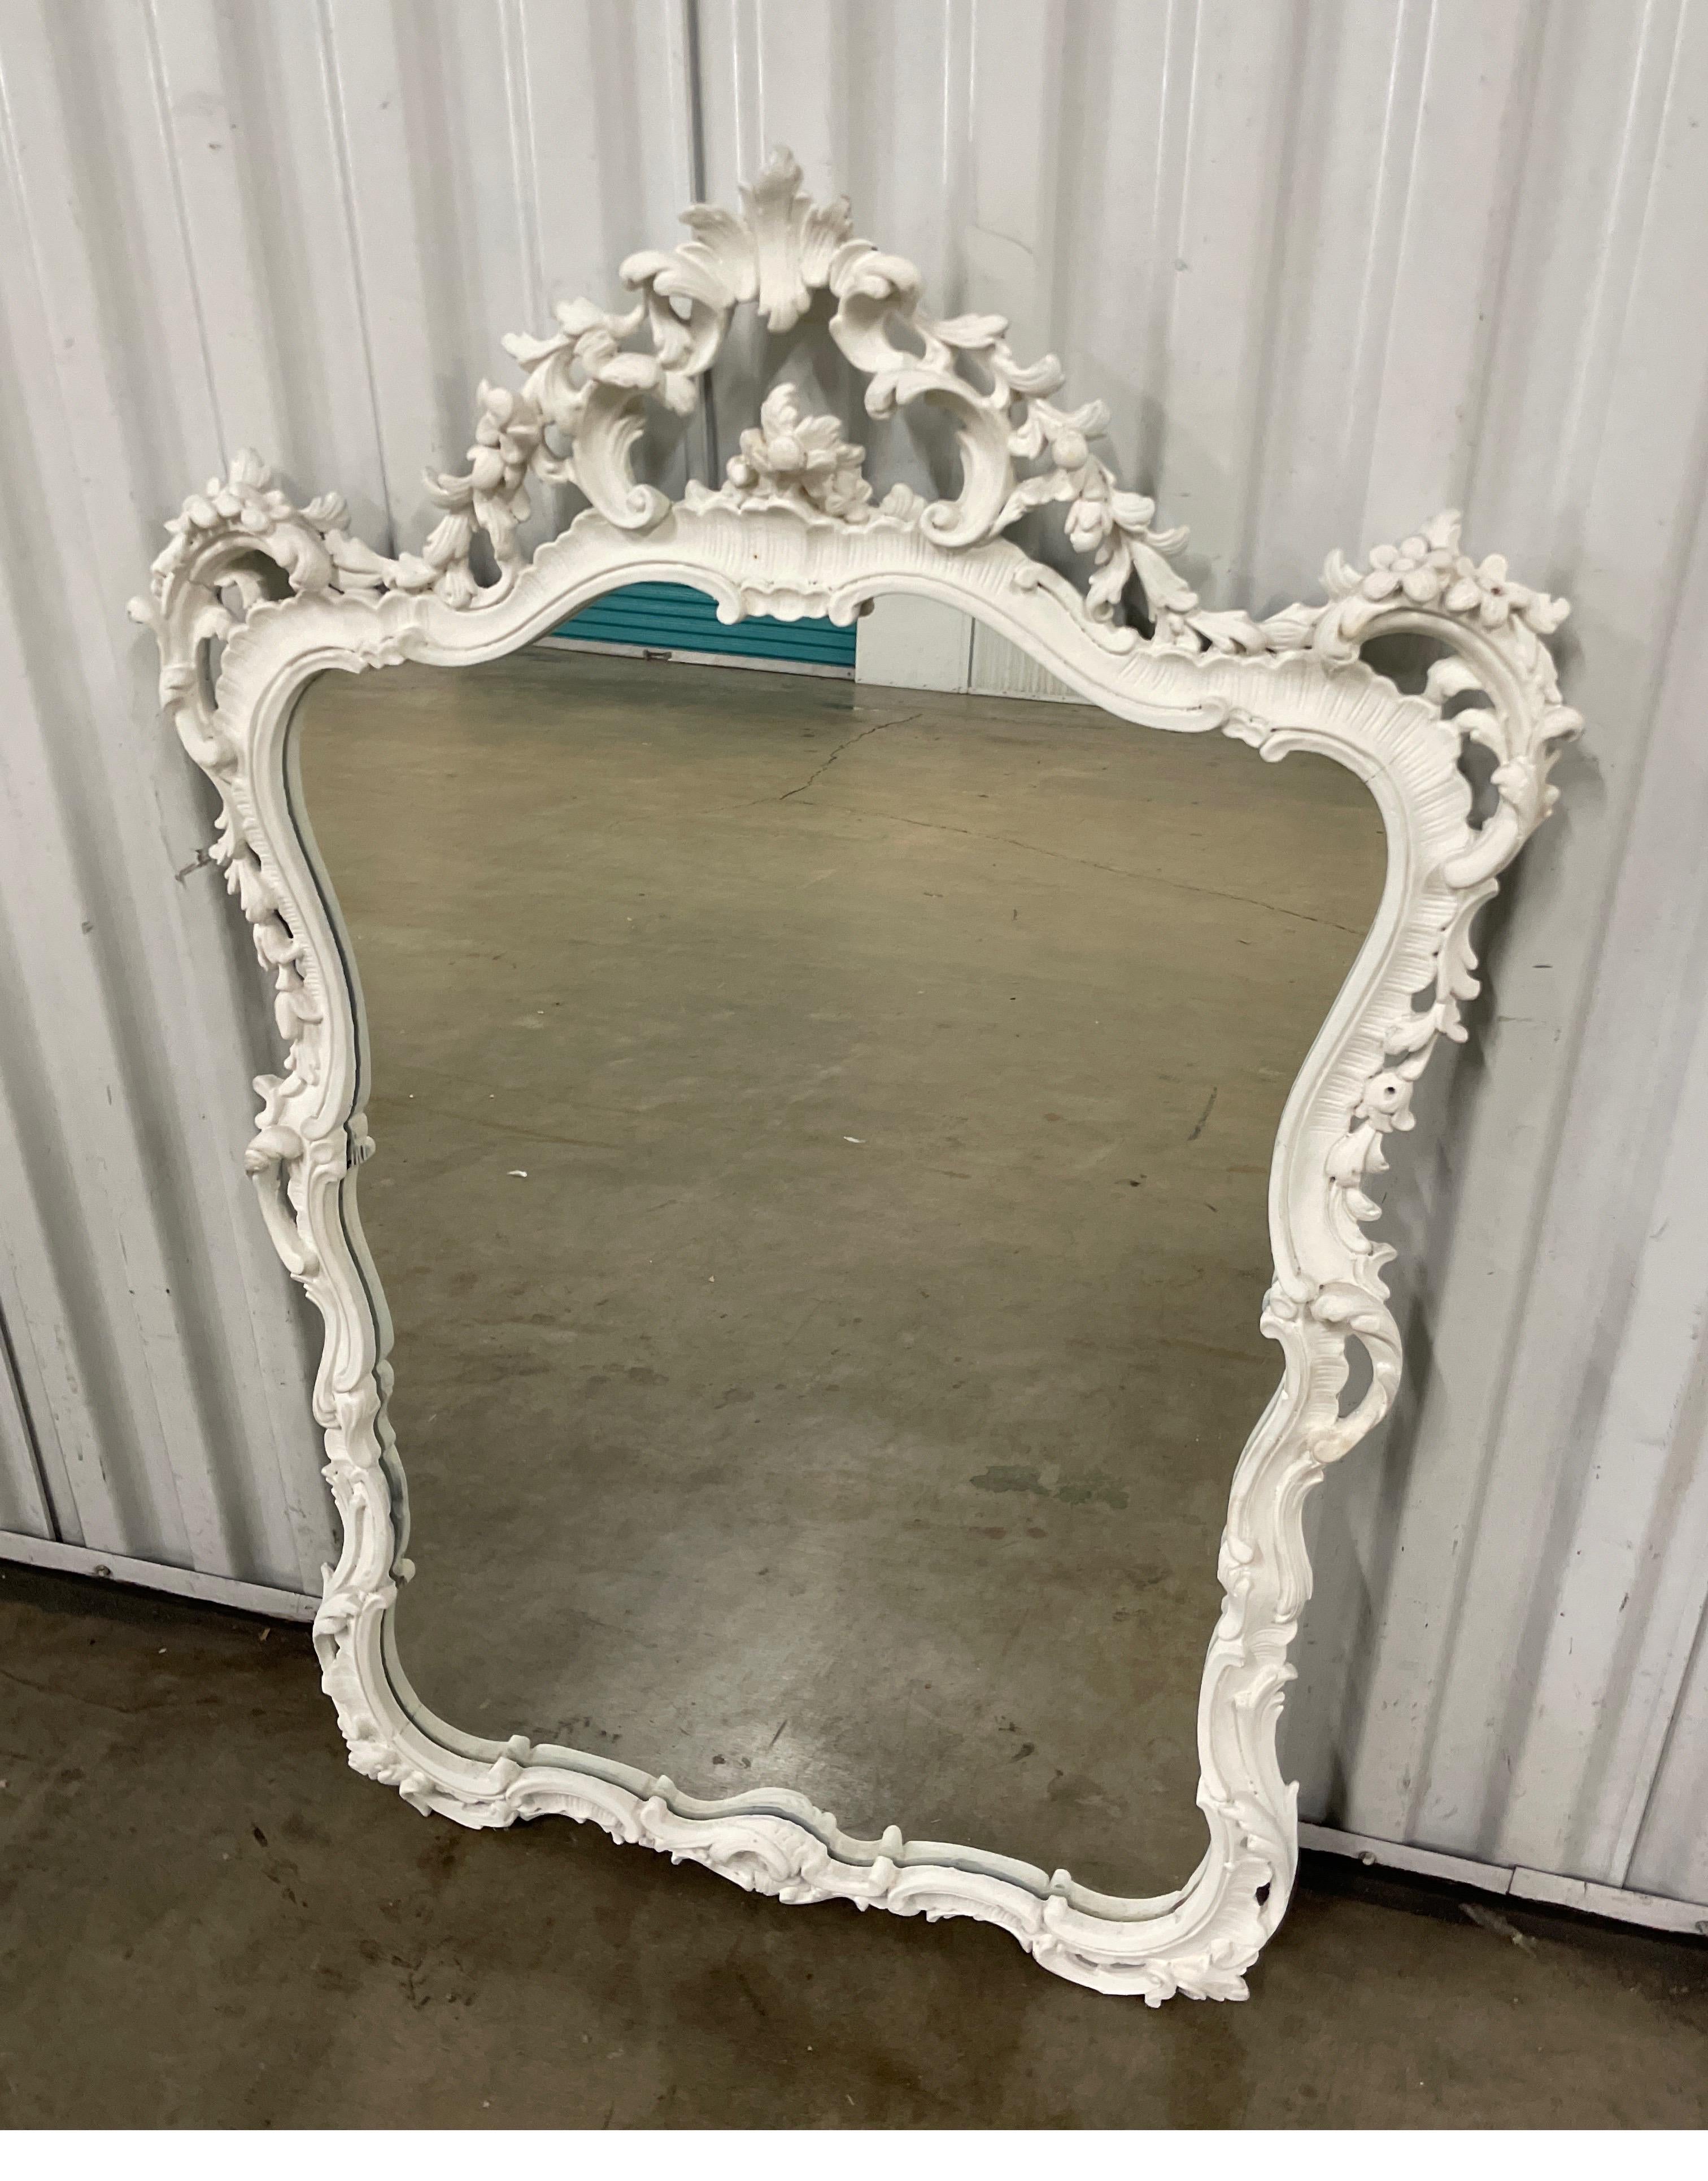 Gesso painted & hand carved Italian wall mirror. Beautifully carved details make this mirror very special. Will look great in a multitude of settings.